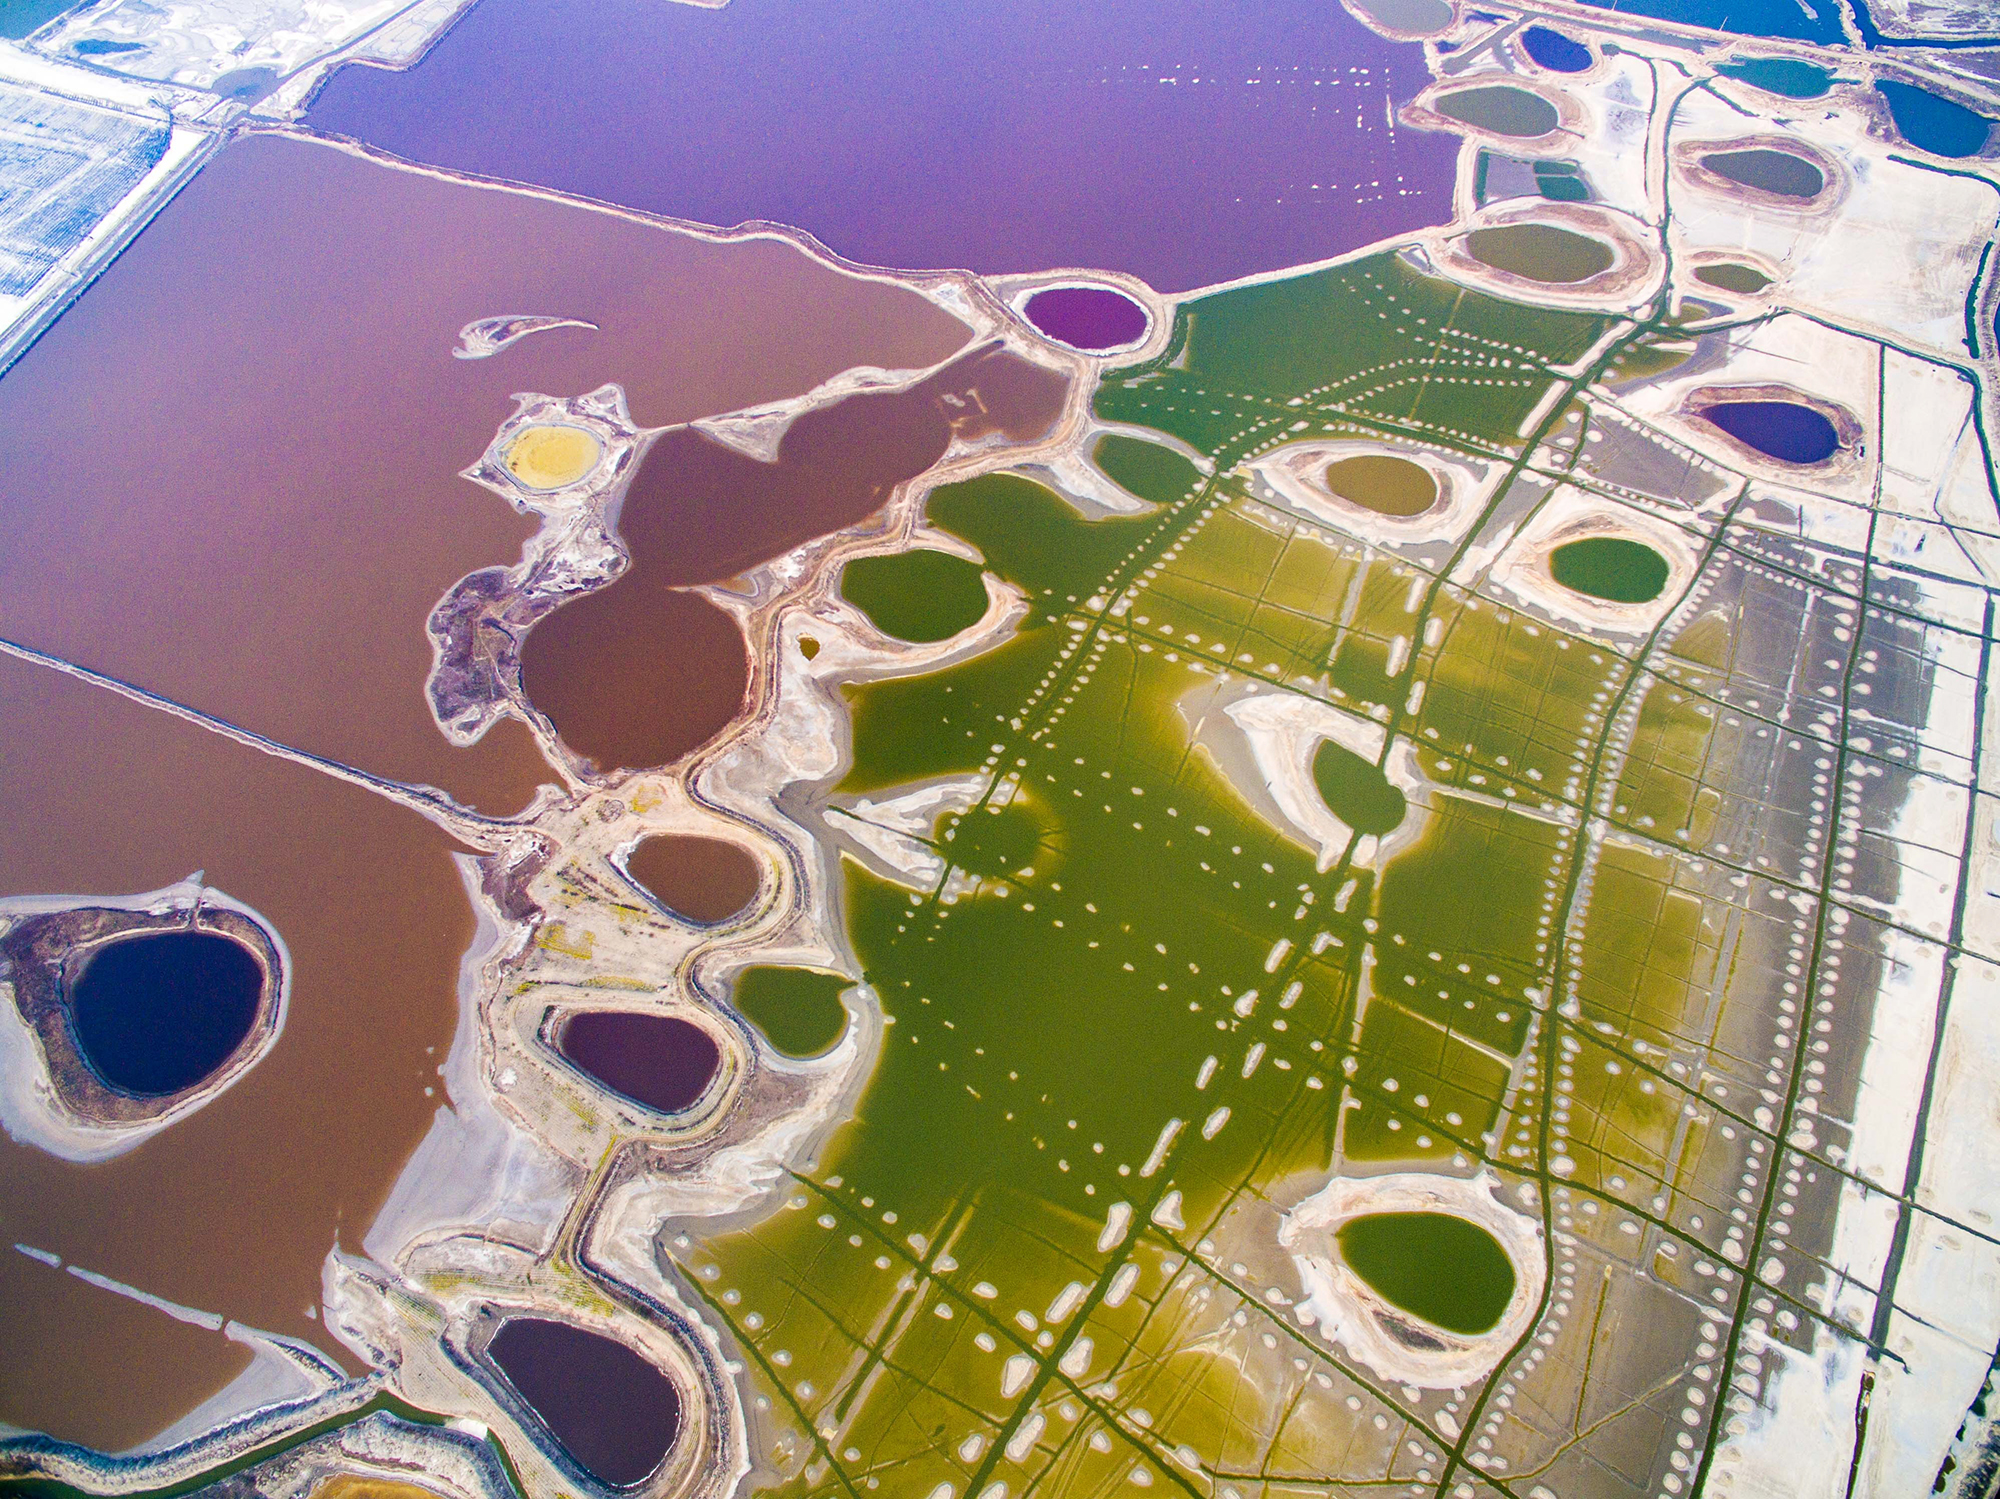 An aerial view of a world-renowned inland salt lake known as the "Dead Sea of China" in Yuncheng, Shanxi Province, on March 20, 2017.